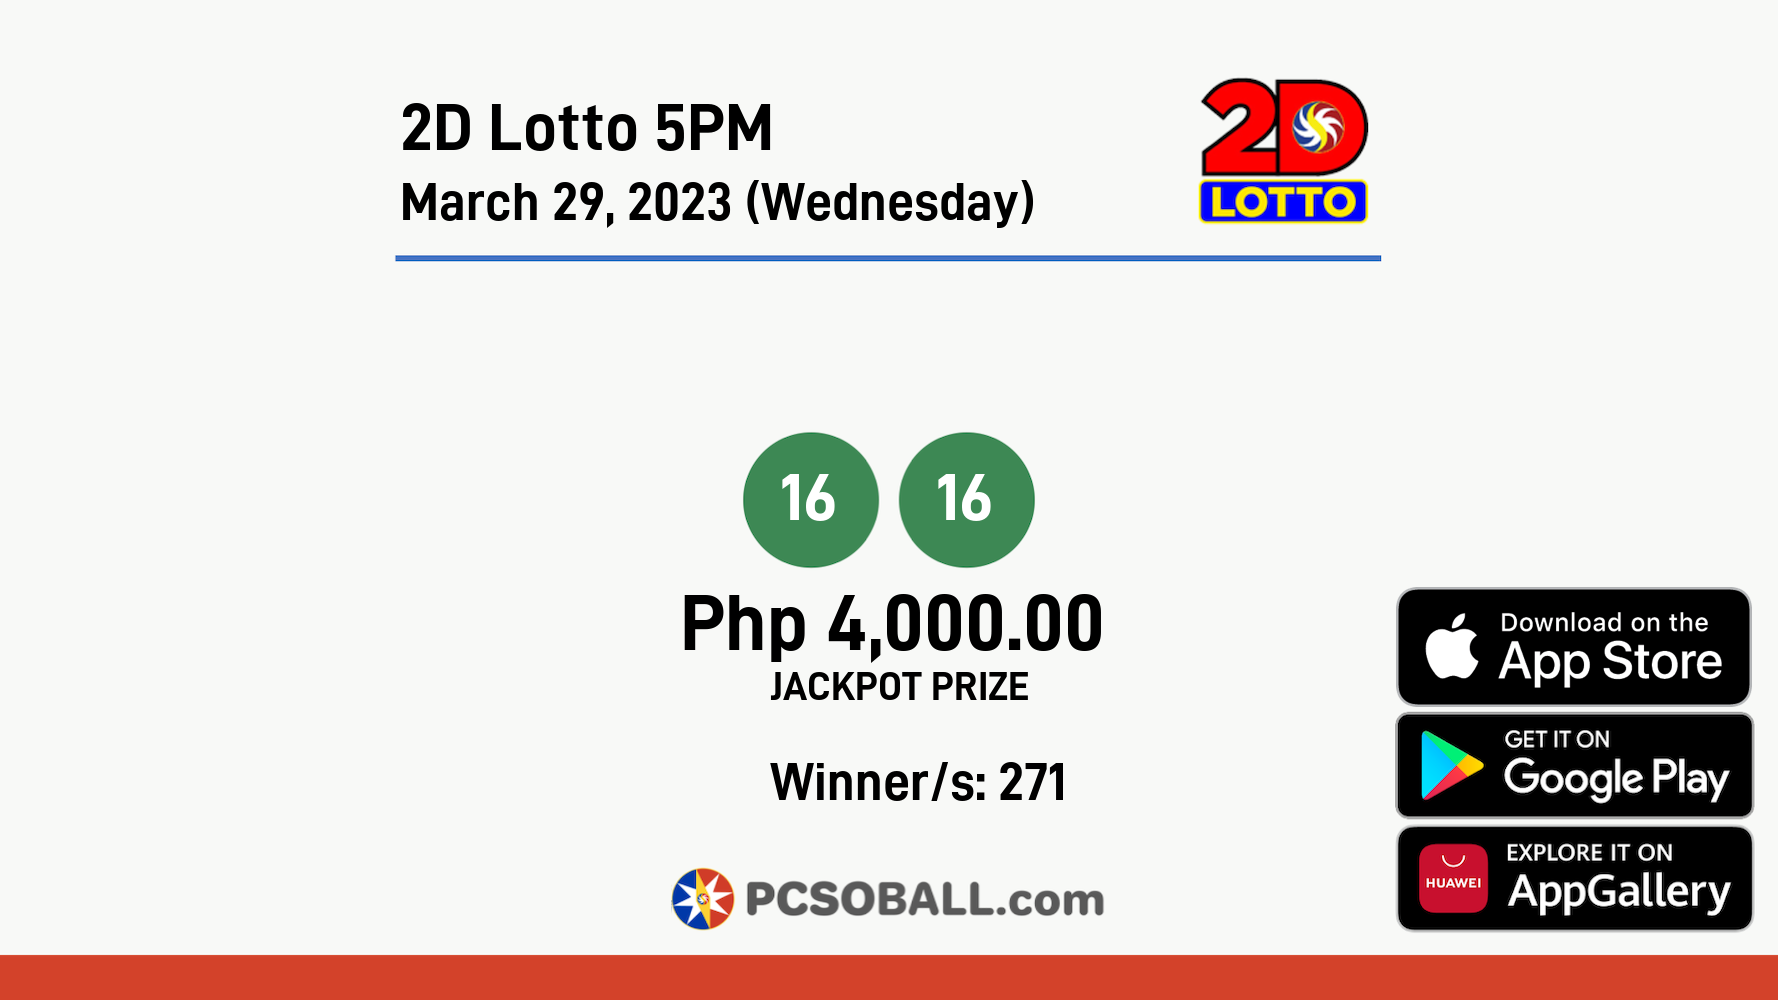 2D Lotto 5PM March 29, 2023 (Wednesday) Result